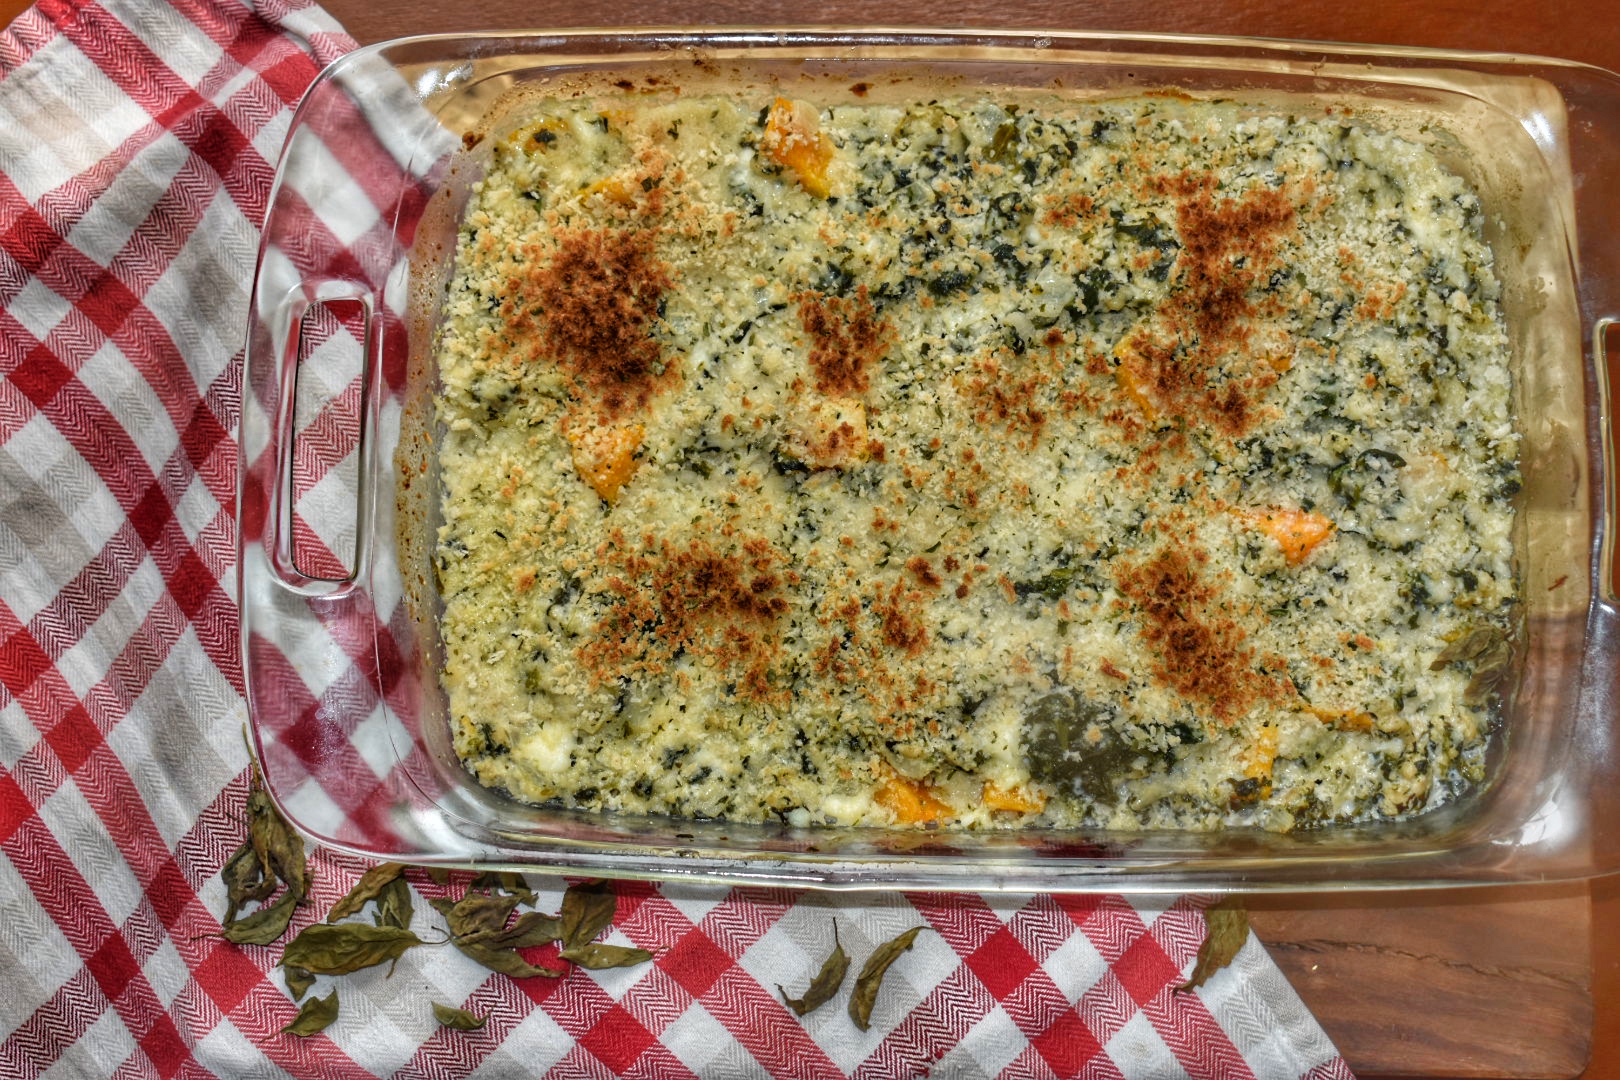 birds eye view of cheesy squash gratin in a glass baking dish on a red and white checkered napkin